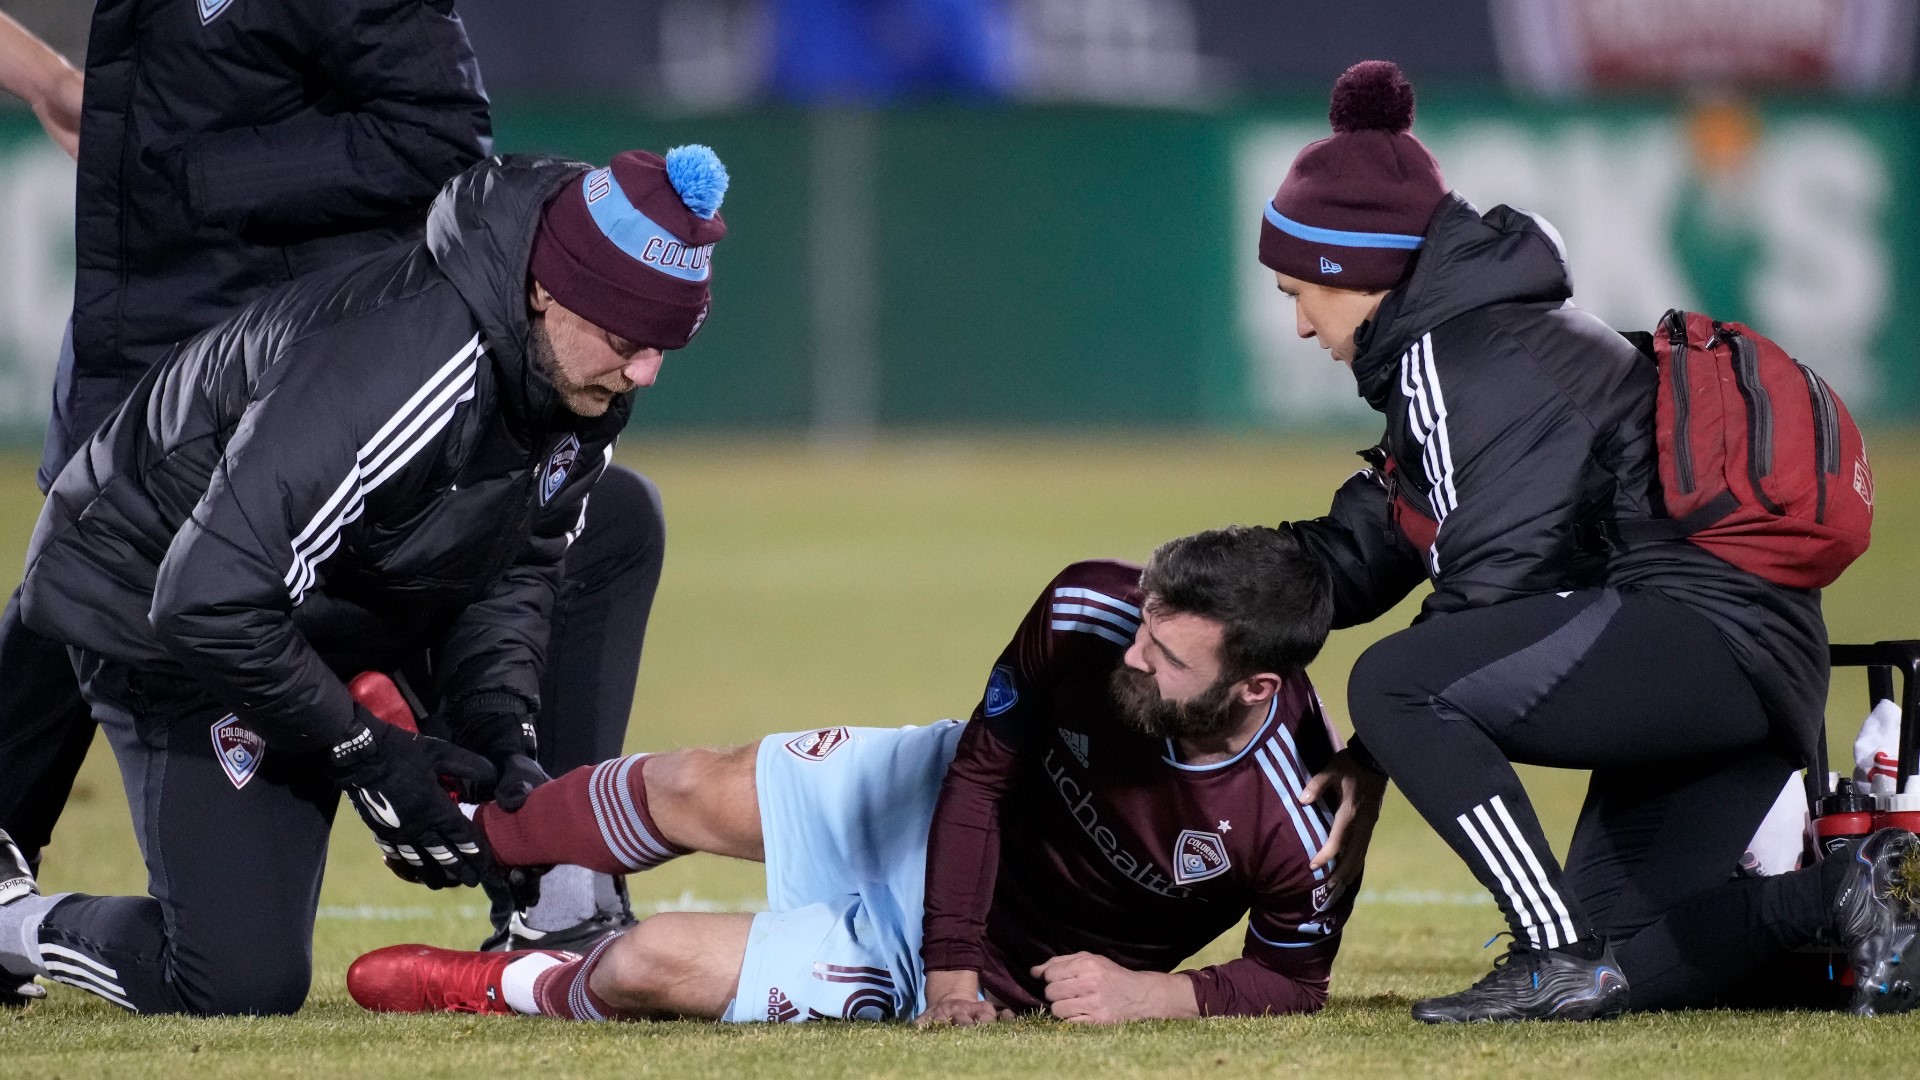 The Rapids announced that Jack Price will undergo surgery later this week and will miss the remainder of the 2023 Major League Soccer season.